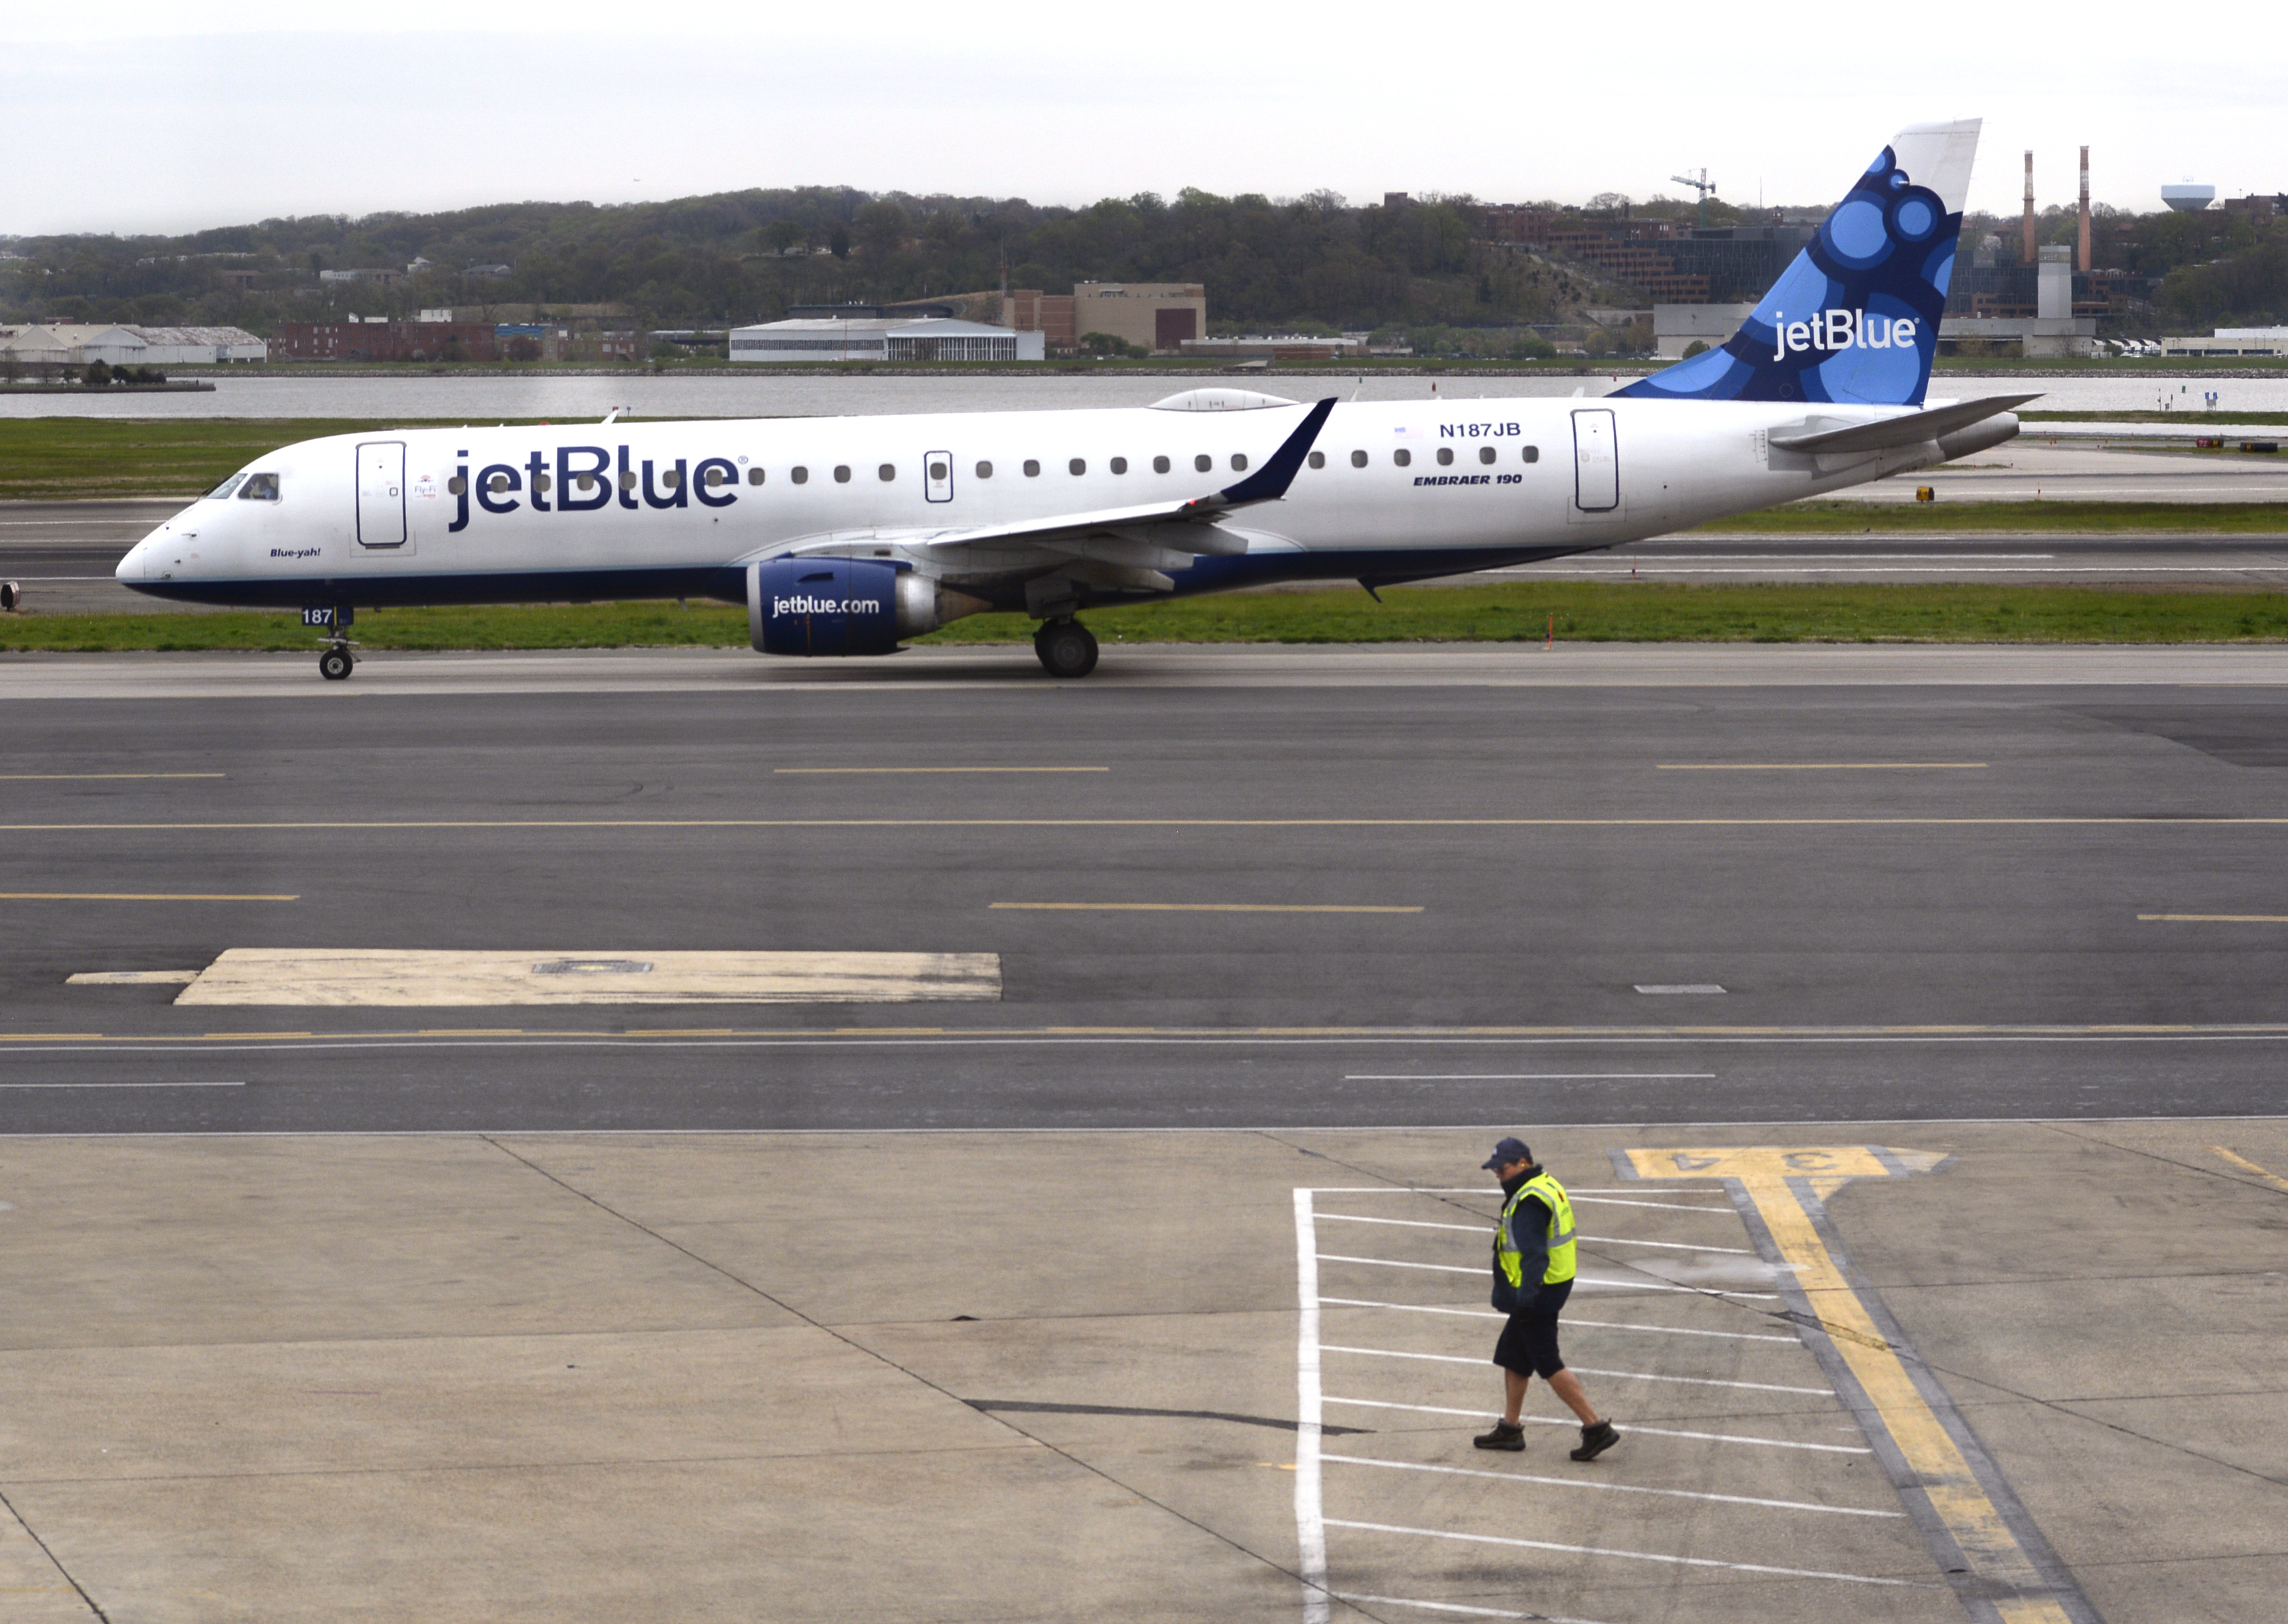 A JetBlue Airways Embraer 190 jet taxis to a gate after landing at Ronald Reagan Washington National Airport in Washington, D.C. (Robert Alexander&mdash;Getty Images)